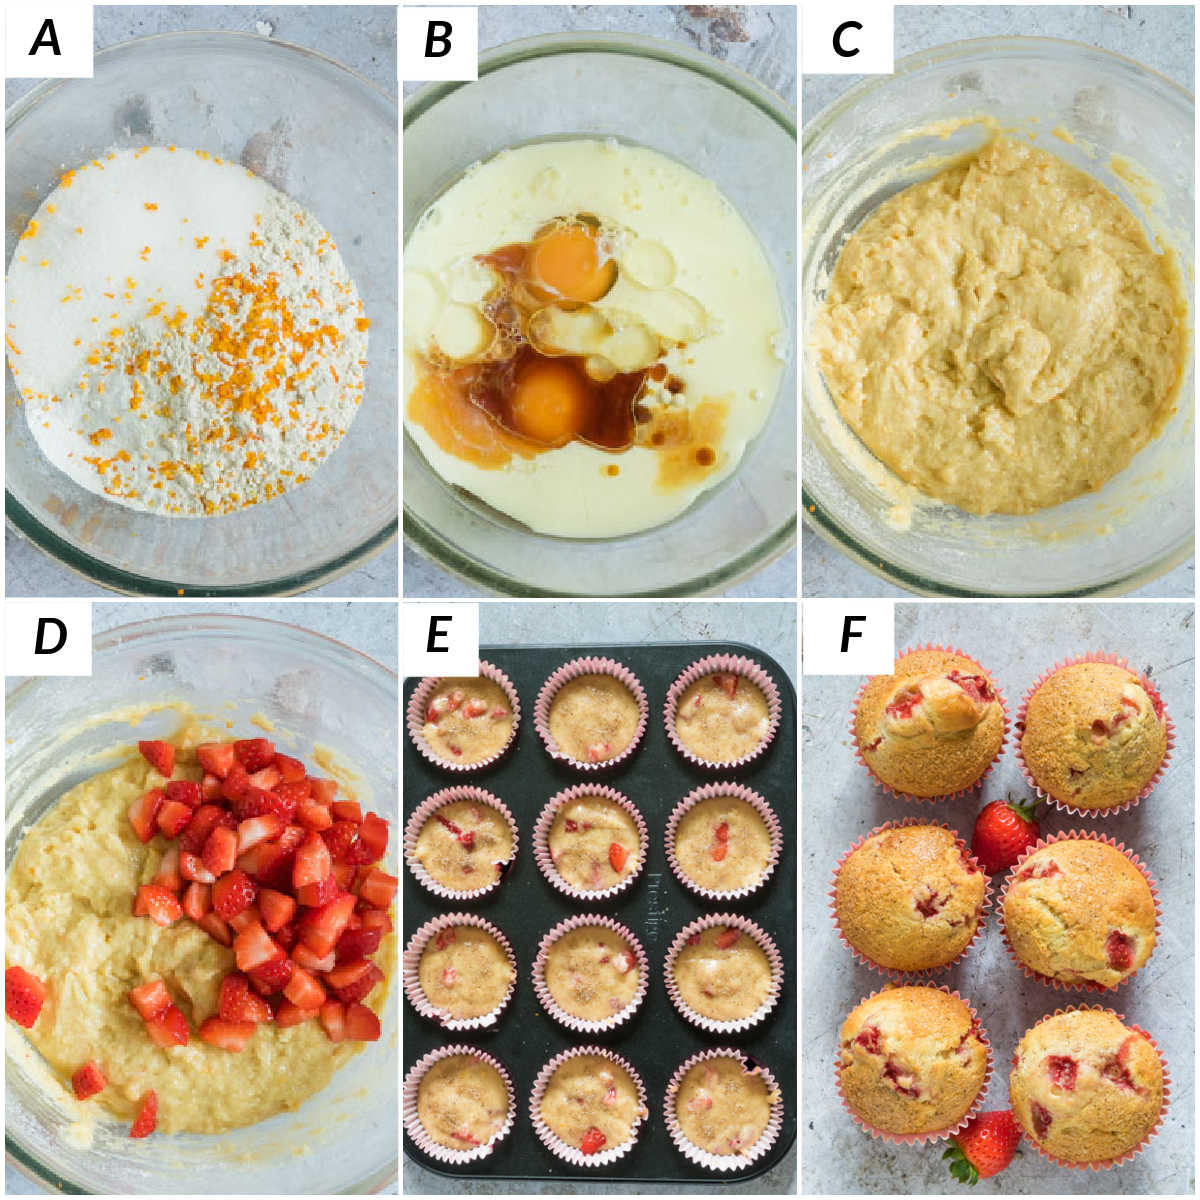 image collage showing the steps for making this strawberry muffin recipe